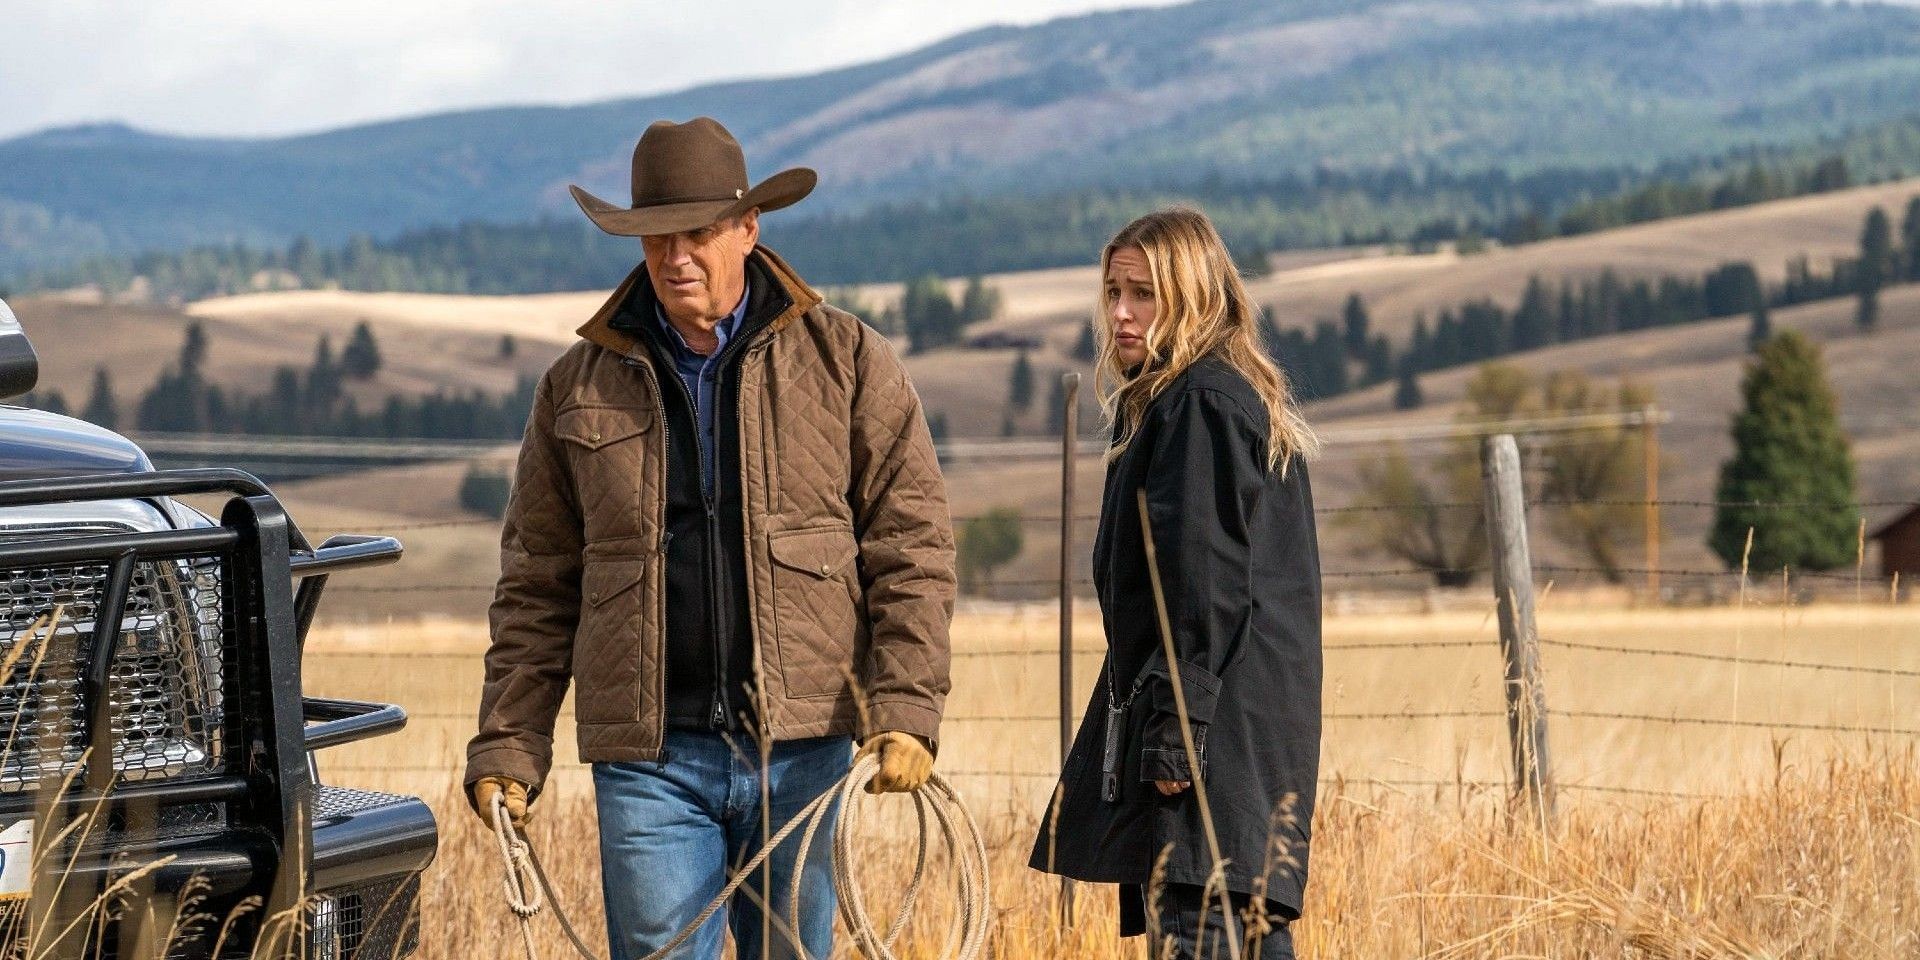 Yellowstone Star Calls Out Politicization Of Characters In Western Series